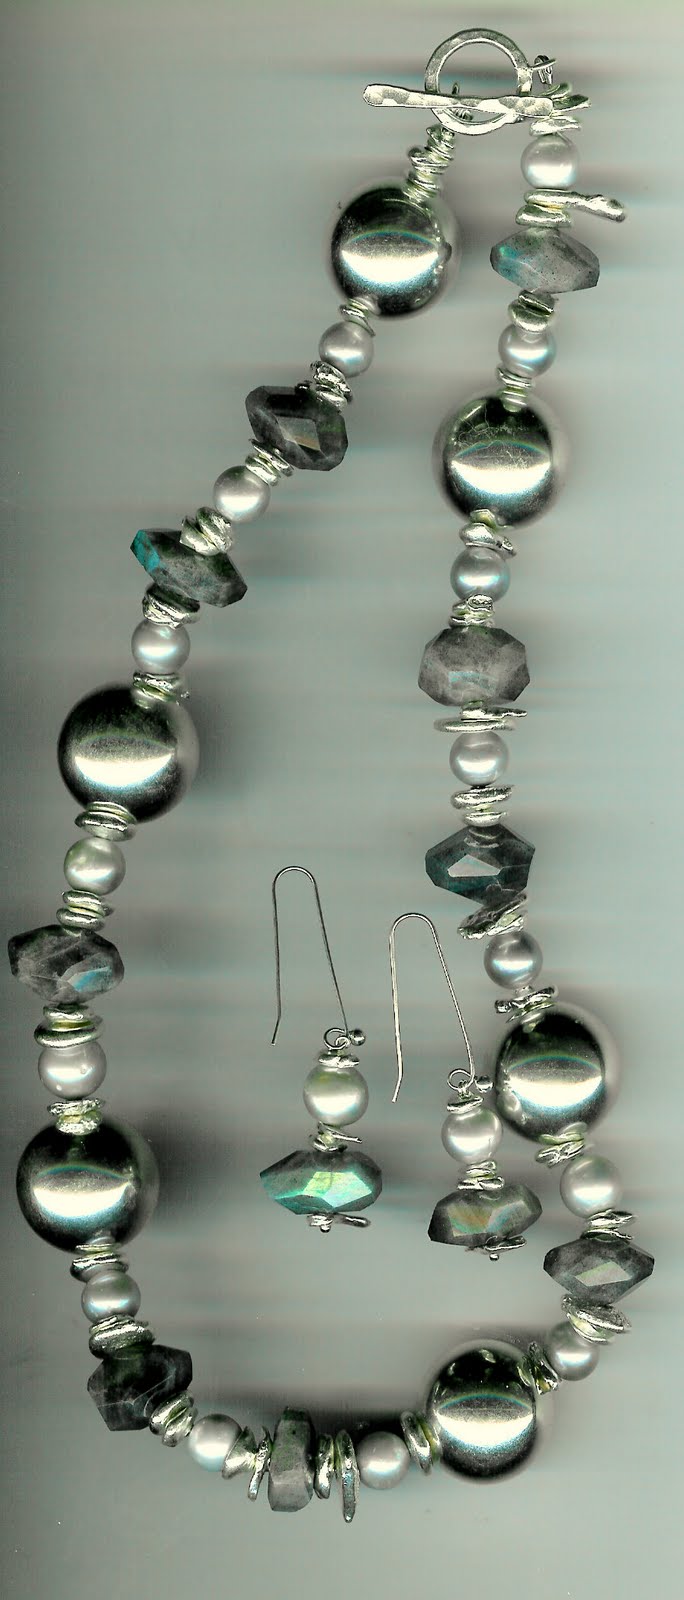 219. Large Sterling Silver Beads, Thai Sterling Silver with Akoya Pearls and Labradorite